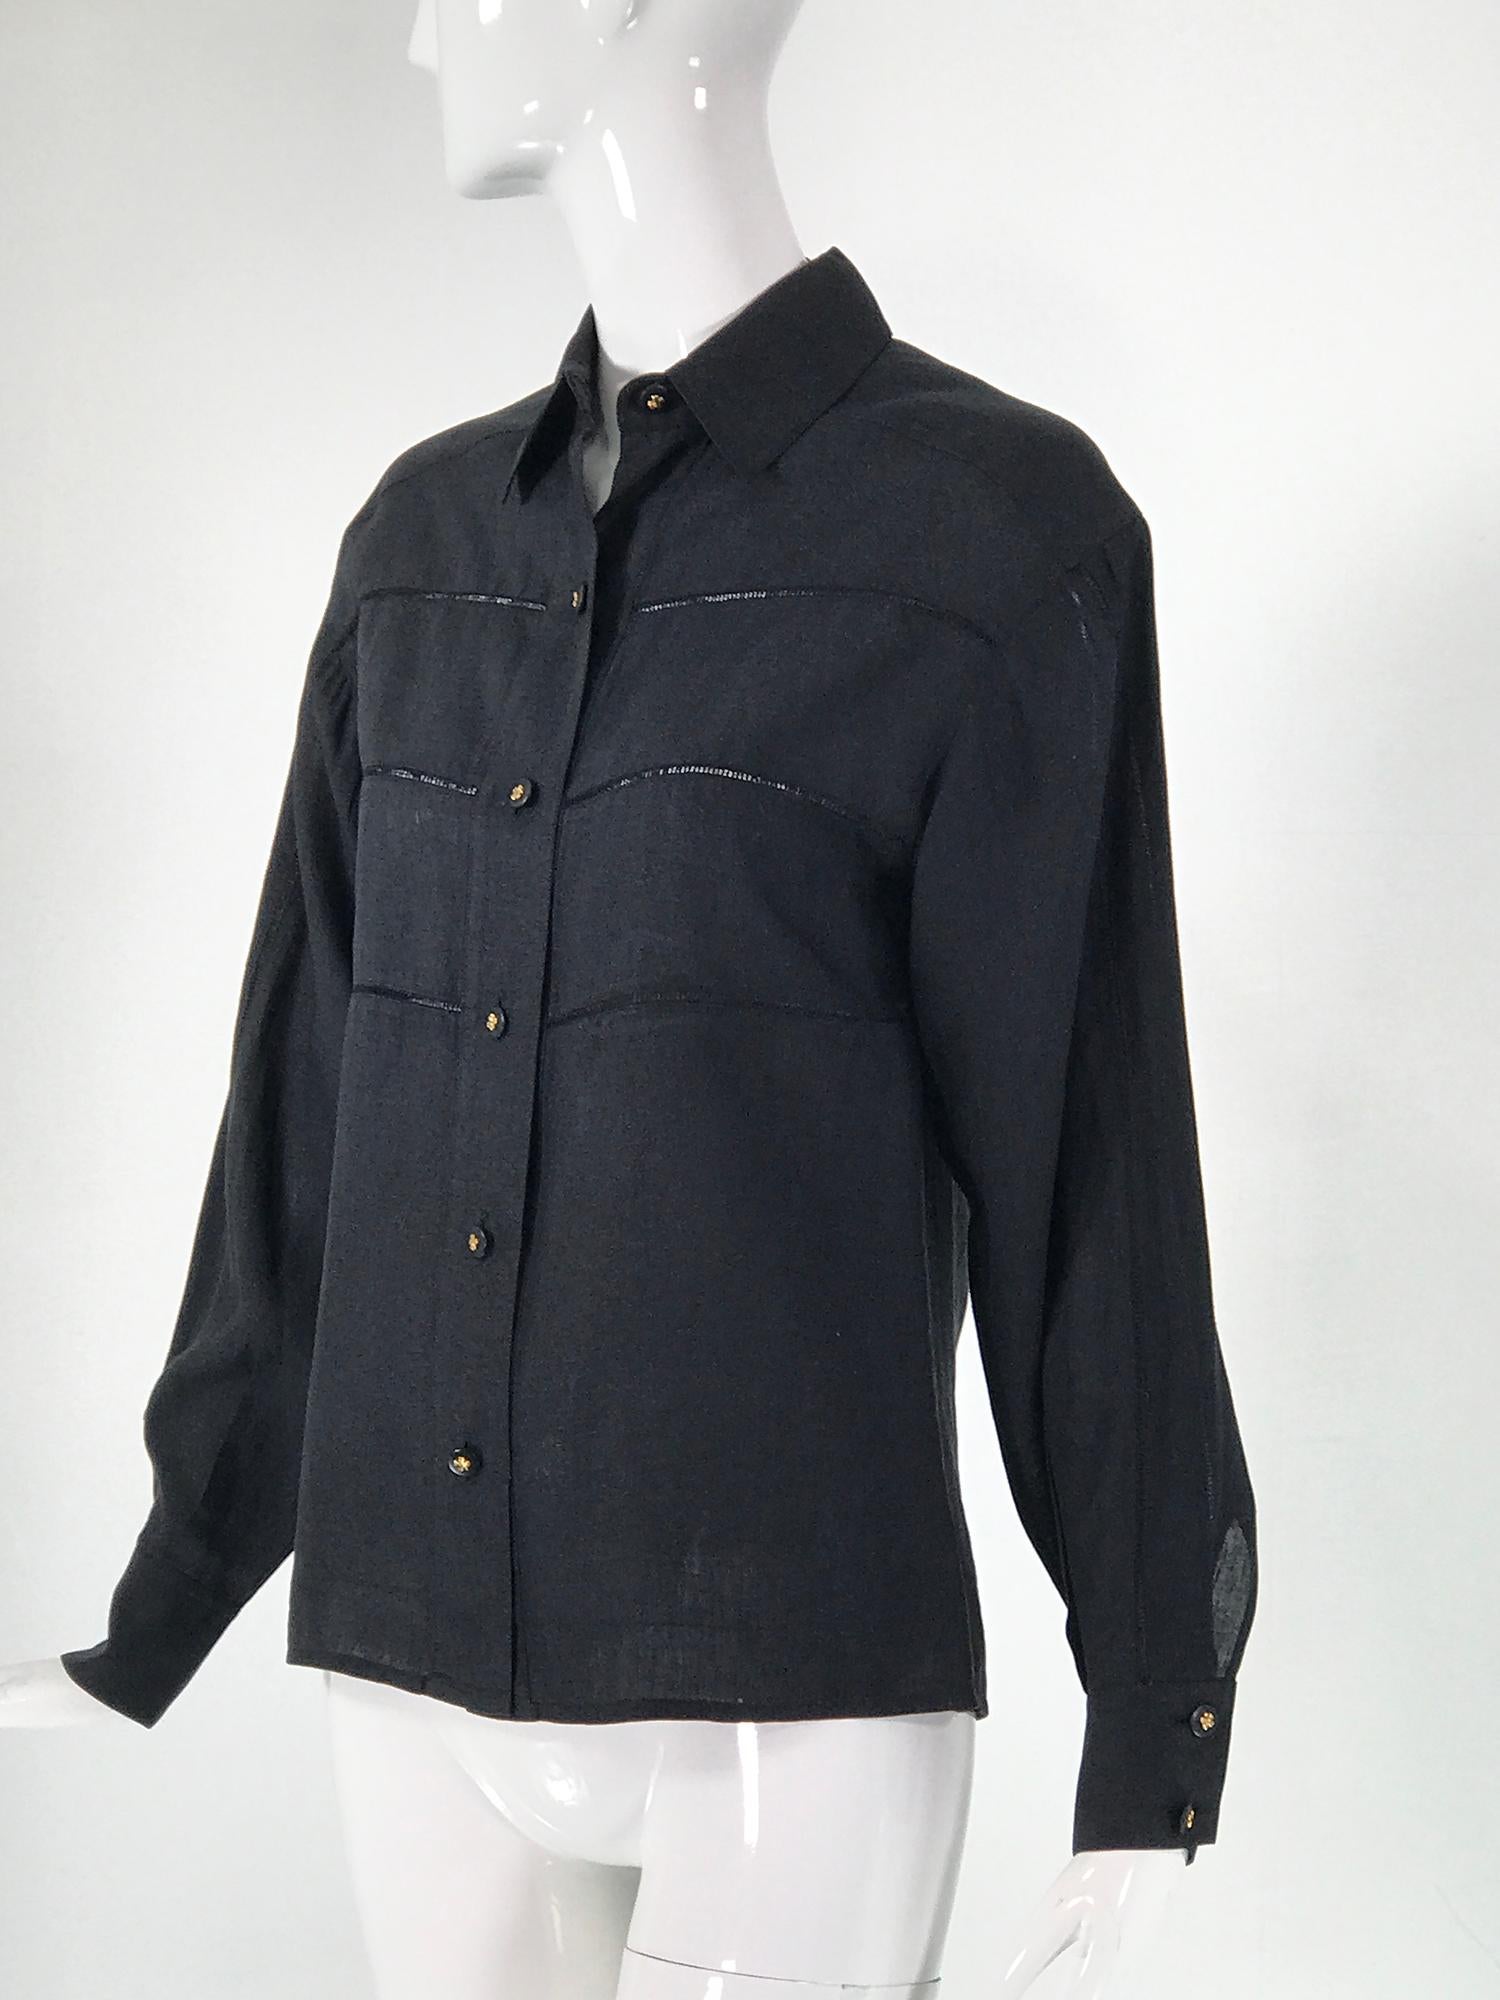 Chanel Black Linen Drawn Work Blouse. Long sleeve button front blouse with three rows of drawn work at each side front. Sleeves with drawn work down the center and double button cuffs. Yoke back with a single inverted pleat down the center. Chanel